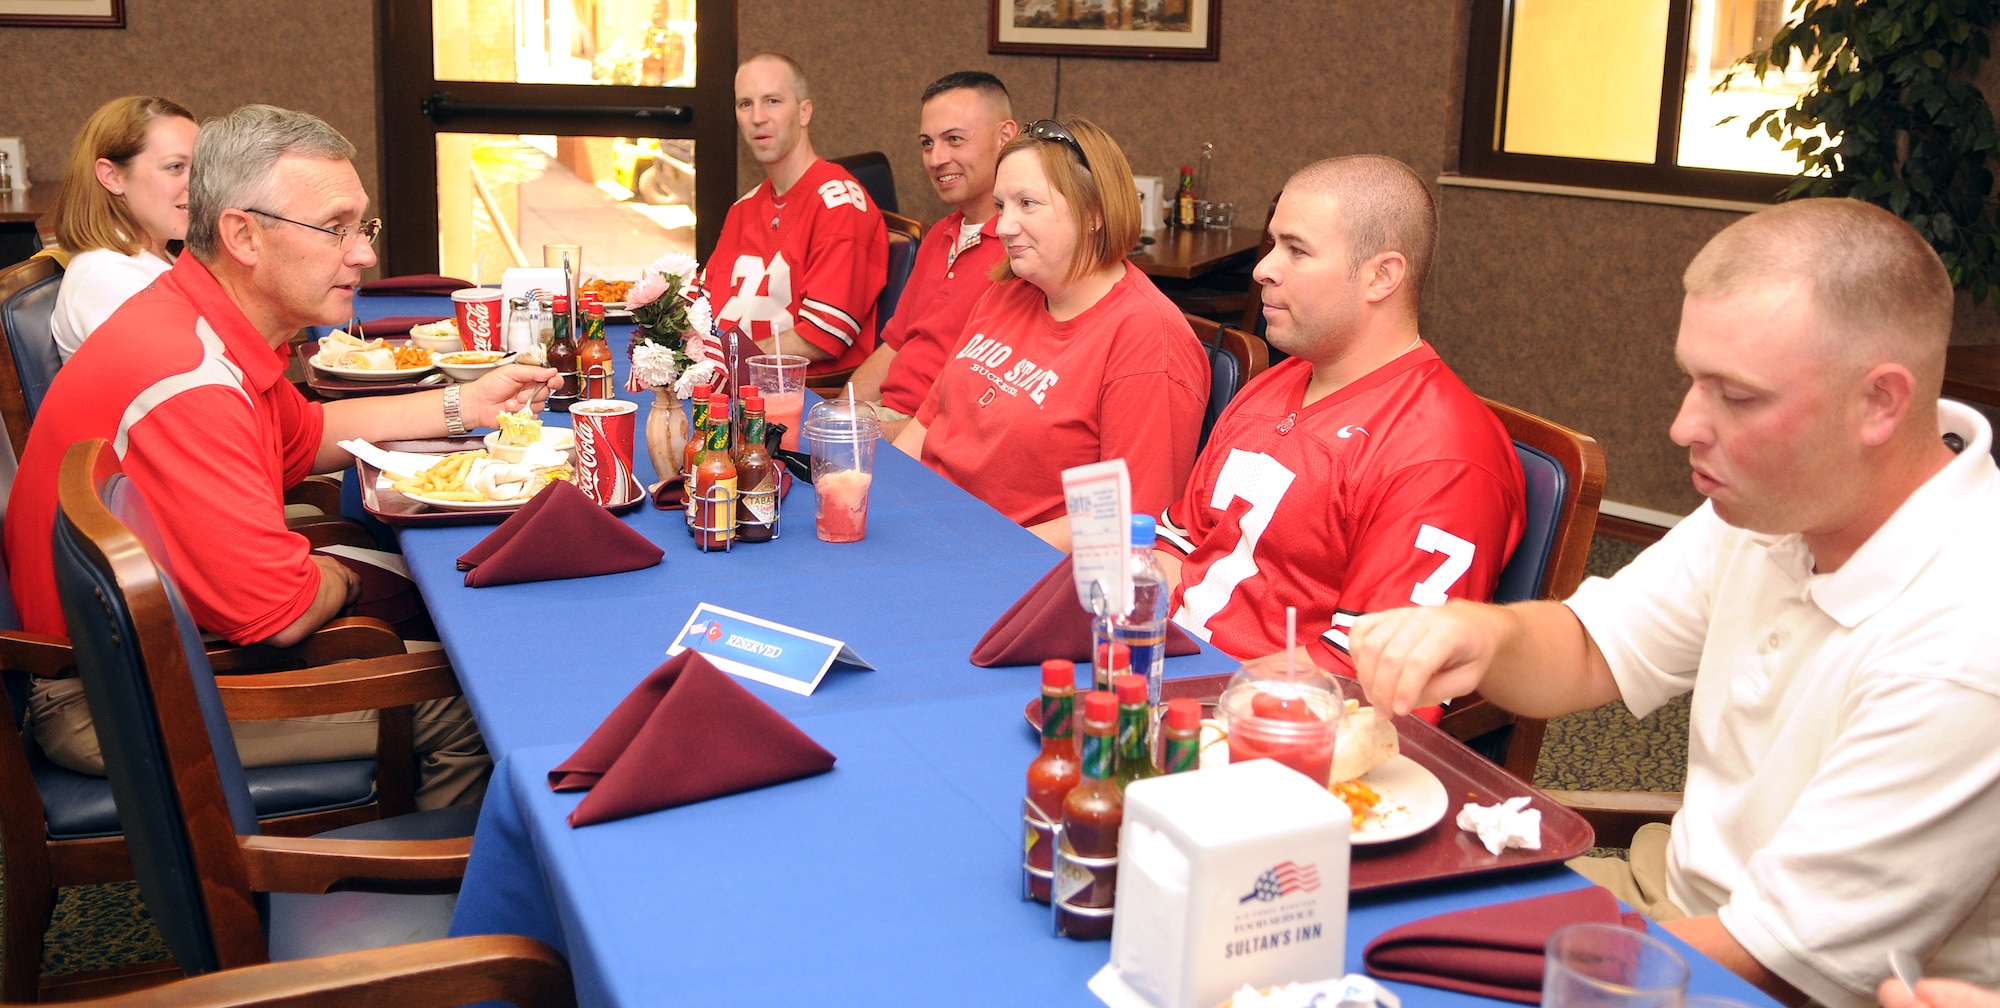 The head coach of Ohio State University’s football team, Jim Tressel, meets and eats lunch with Incirlik Airmen and Buckeye fans during the 2nd annual Armed Forces Entertainment Coaches Tour Saturday, May 30, 2009 at the Sultan Inn here. Coach Tressel, along with five other NCAA football coaches, toured the base as well as military installations in Germany, Spain, Iraq and Djibouti. Ohio State drew the most fans at the luncheon event. (U.S. Air Force photo/Airman 1st Class Alex Martinez)